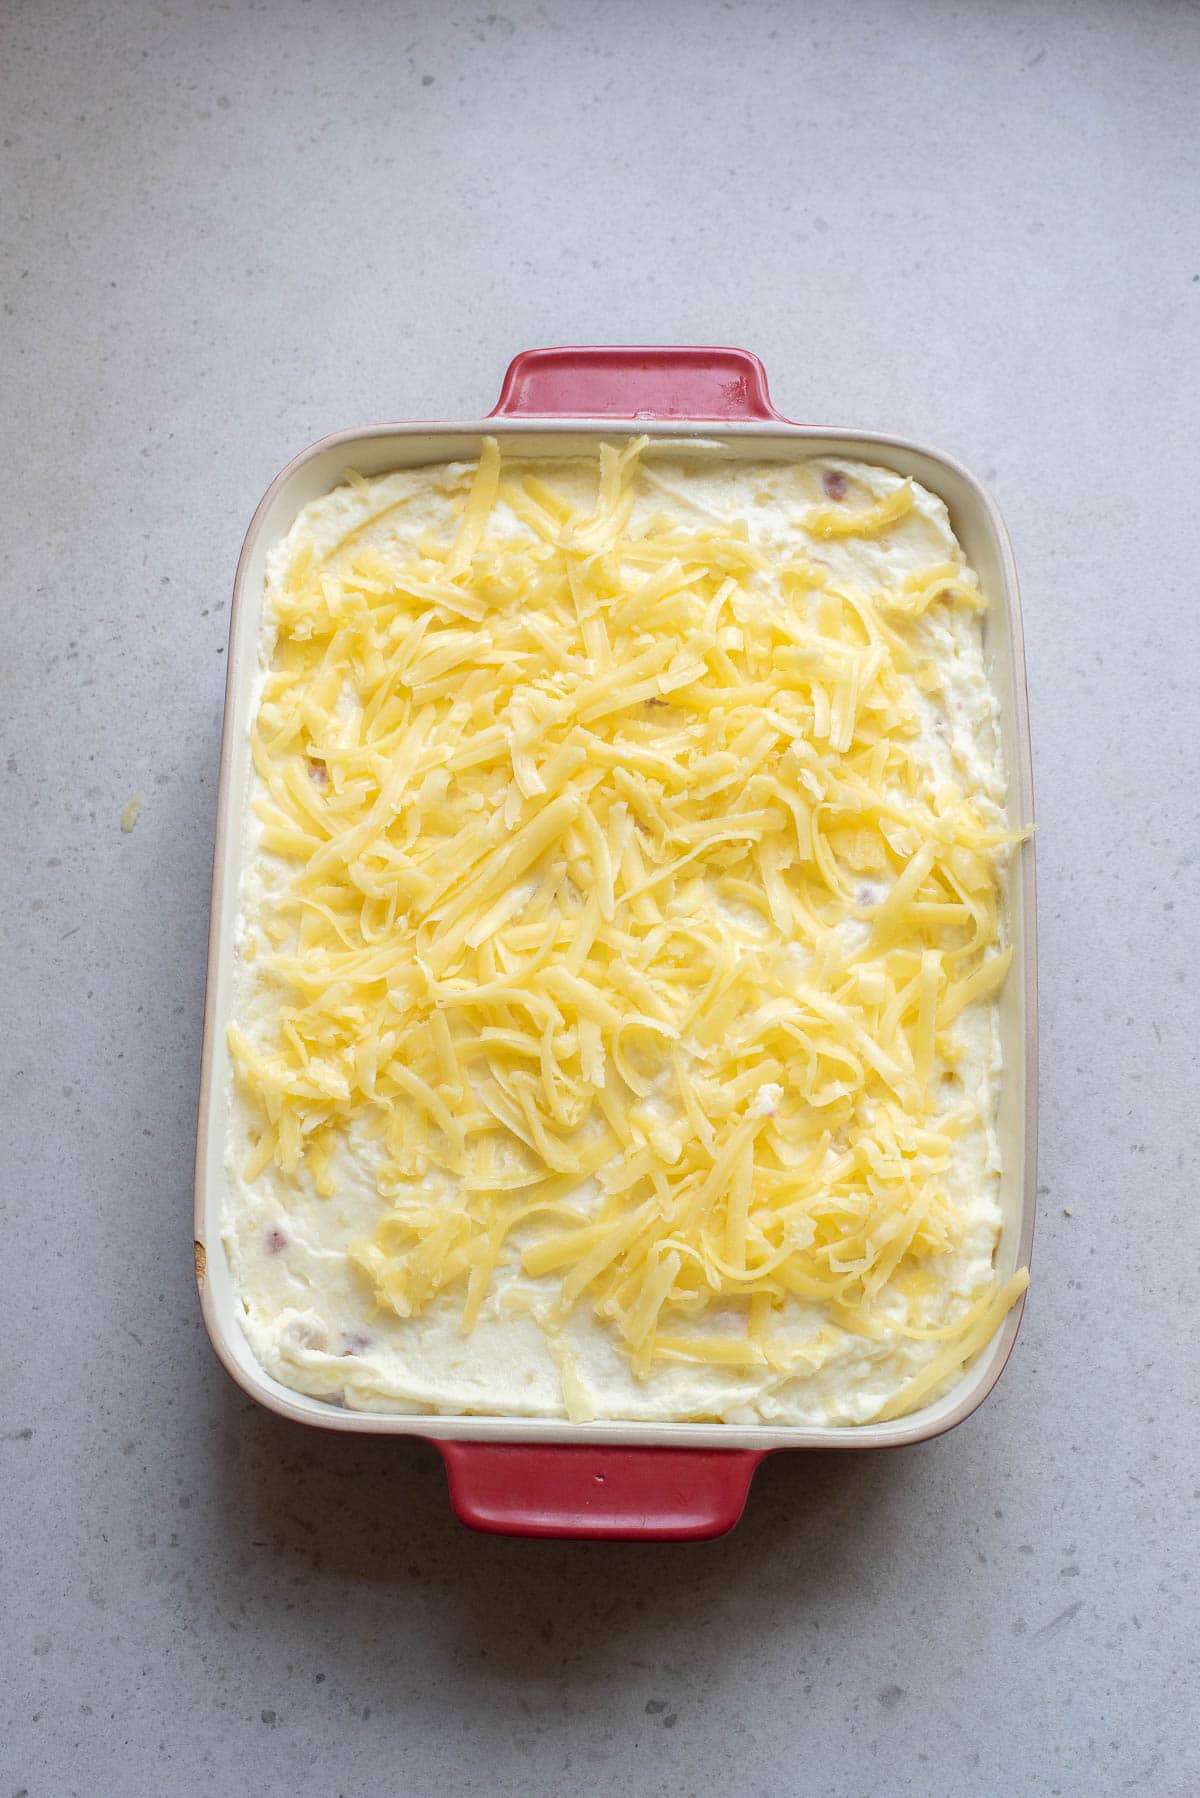 Mashed potatoes and cheese in a baking dish, uncooked.